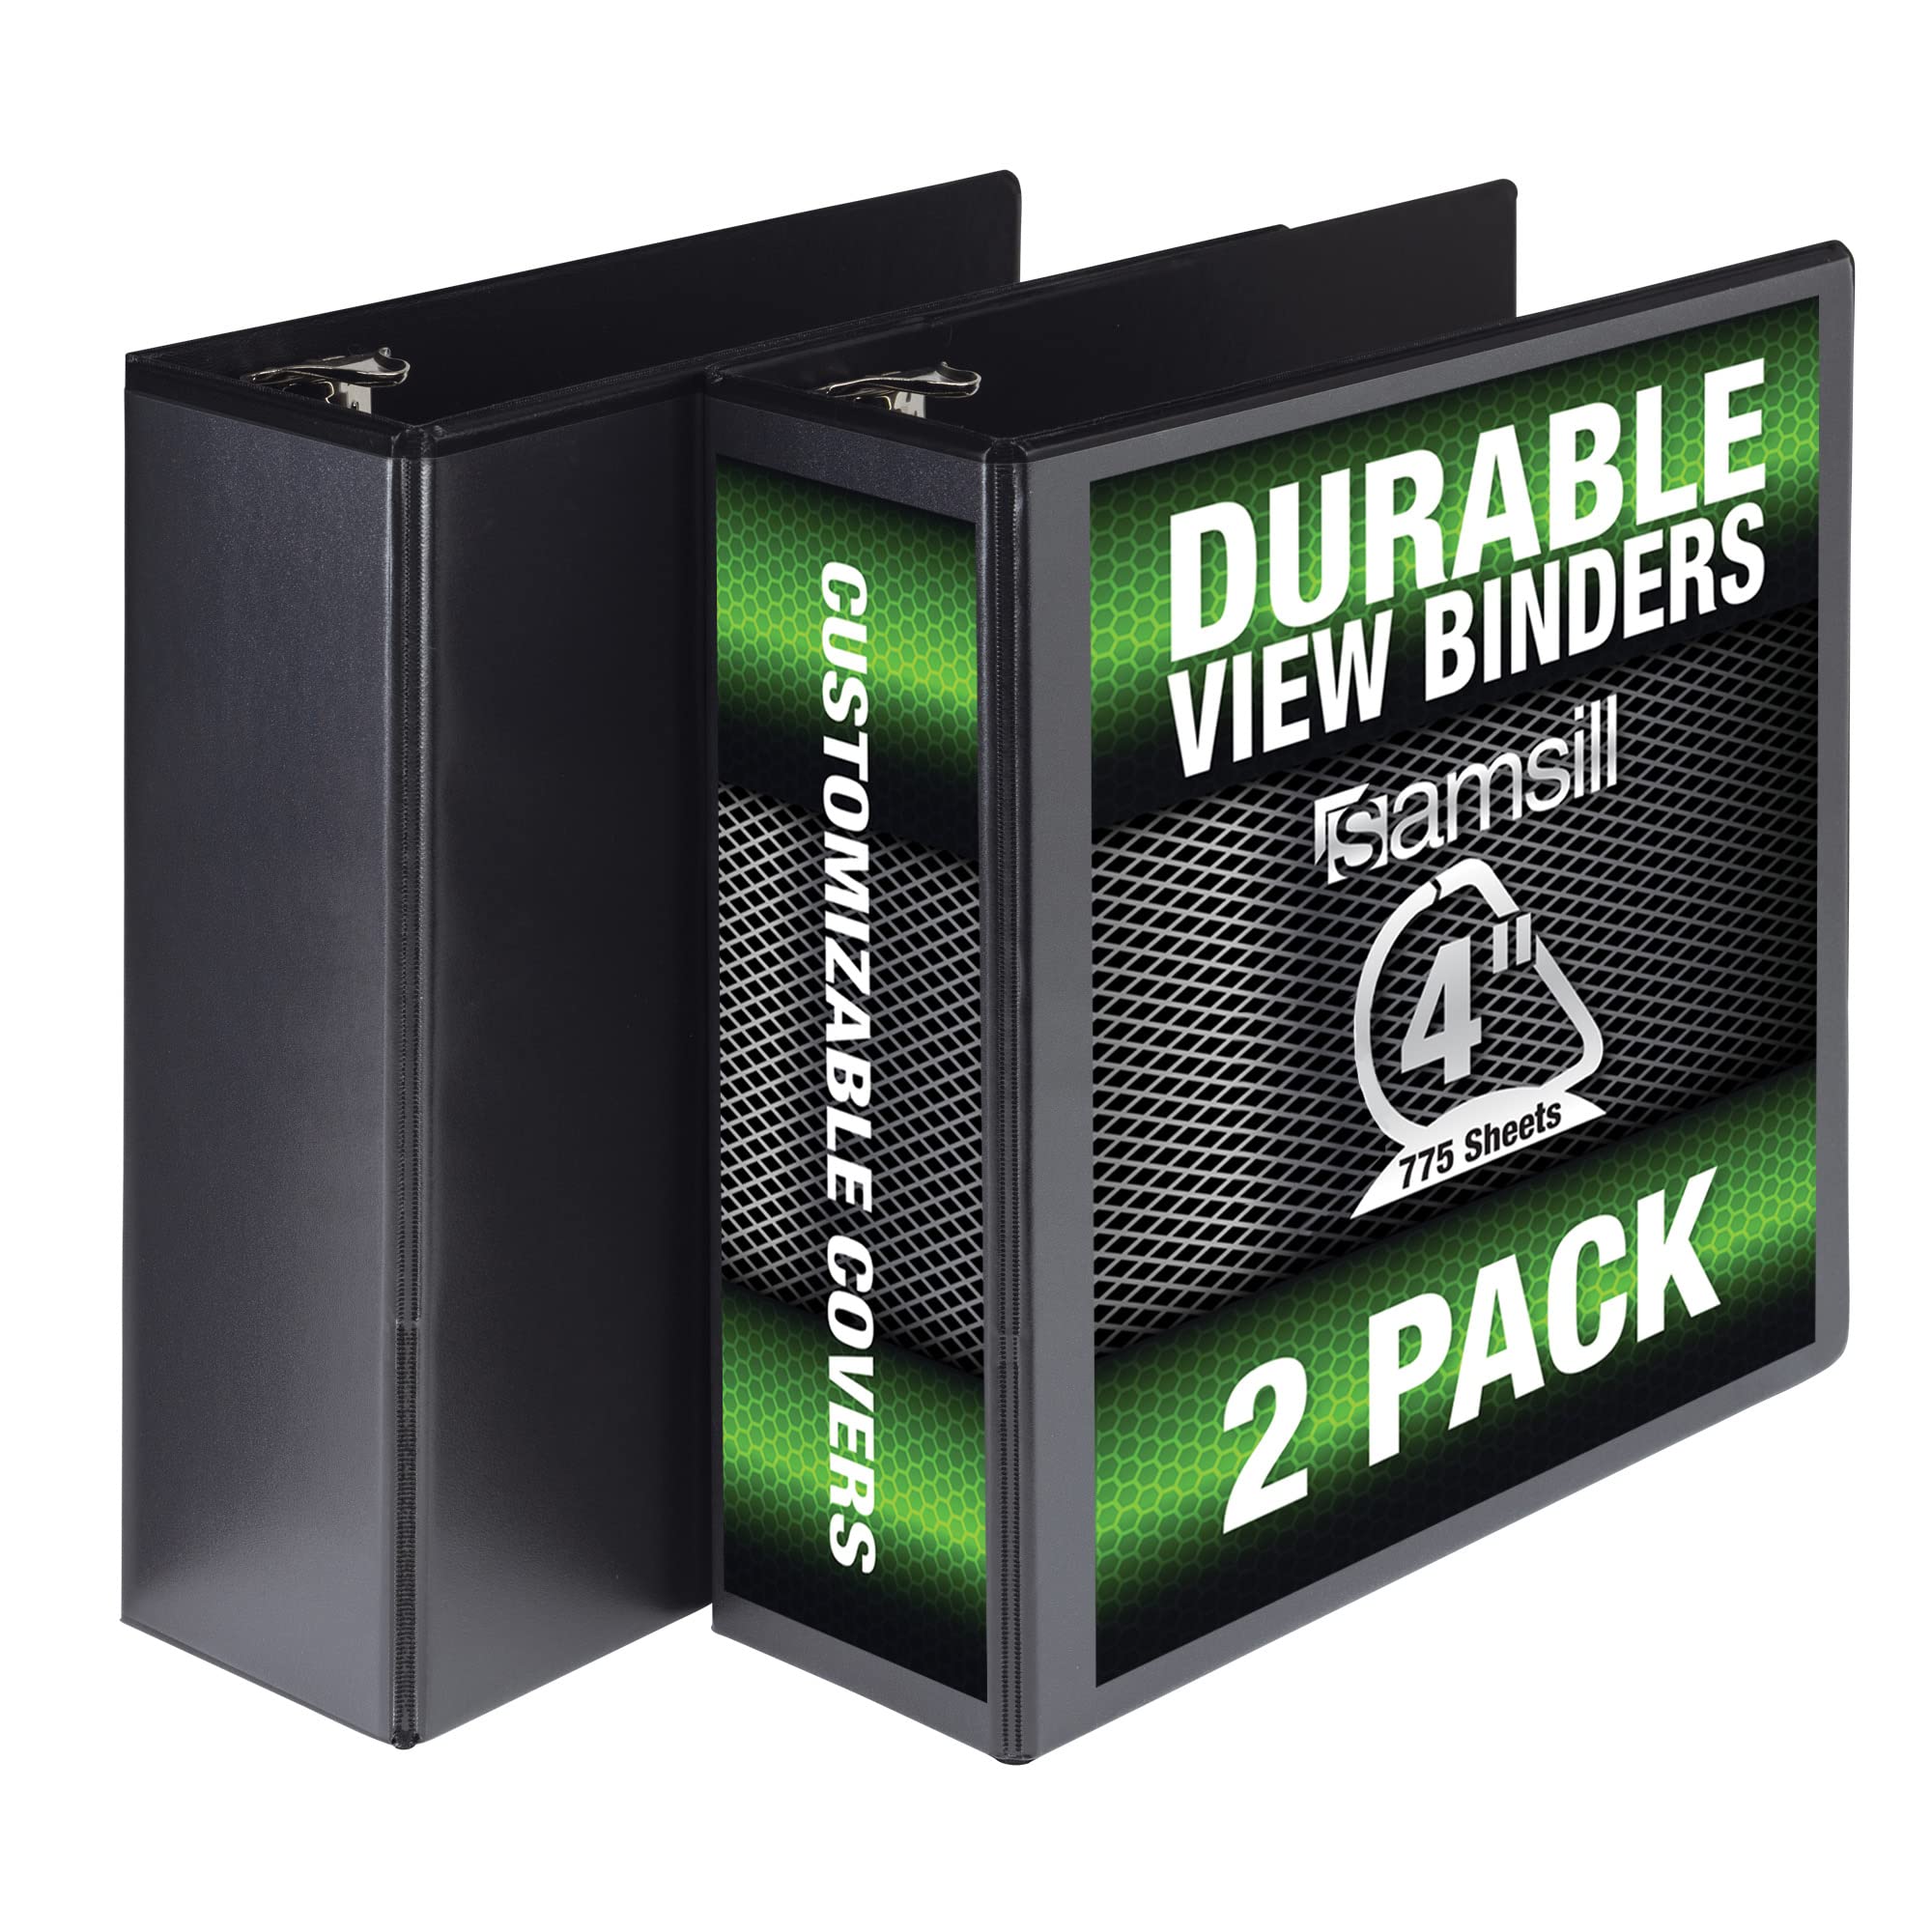 Book Cover Samsill Durable 4 Inch Binder, Made in the USA, Locking D Ring Customizable Clear View Binder, Black, 2 Pack, Each Holds 775 Pages 4 Inch 2 Pack Black